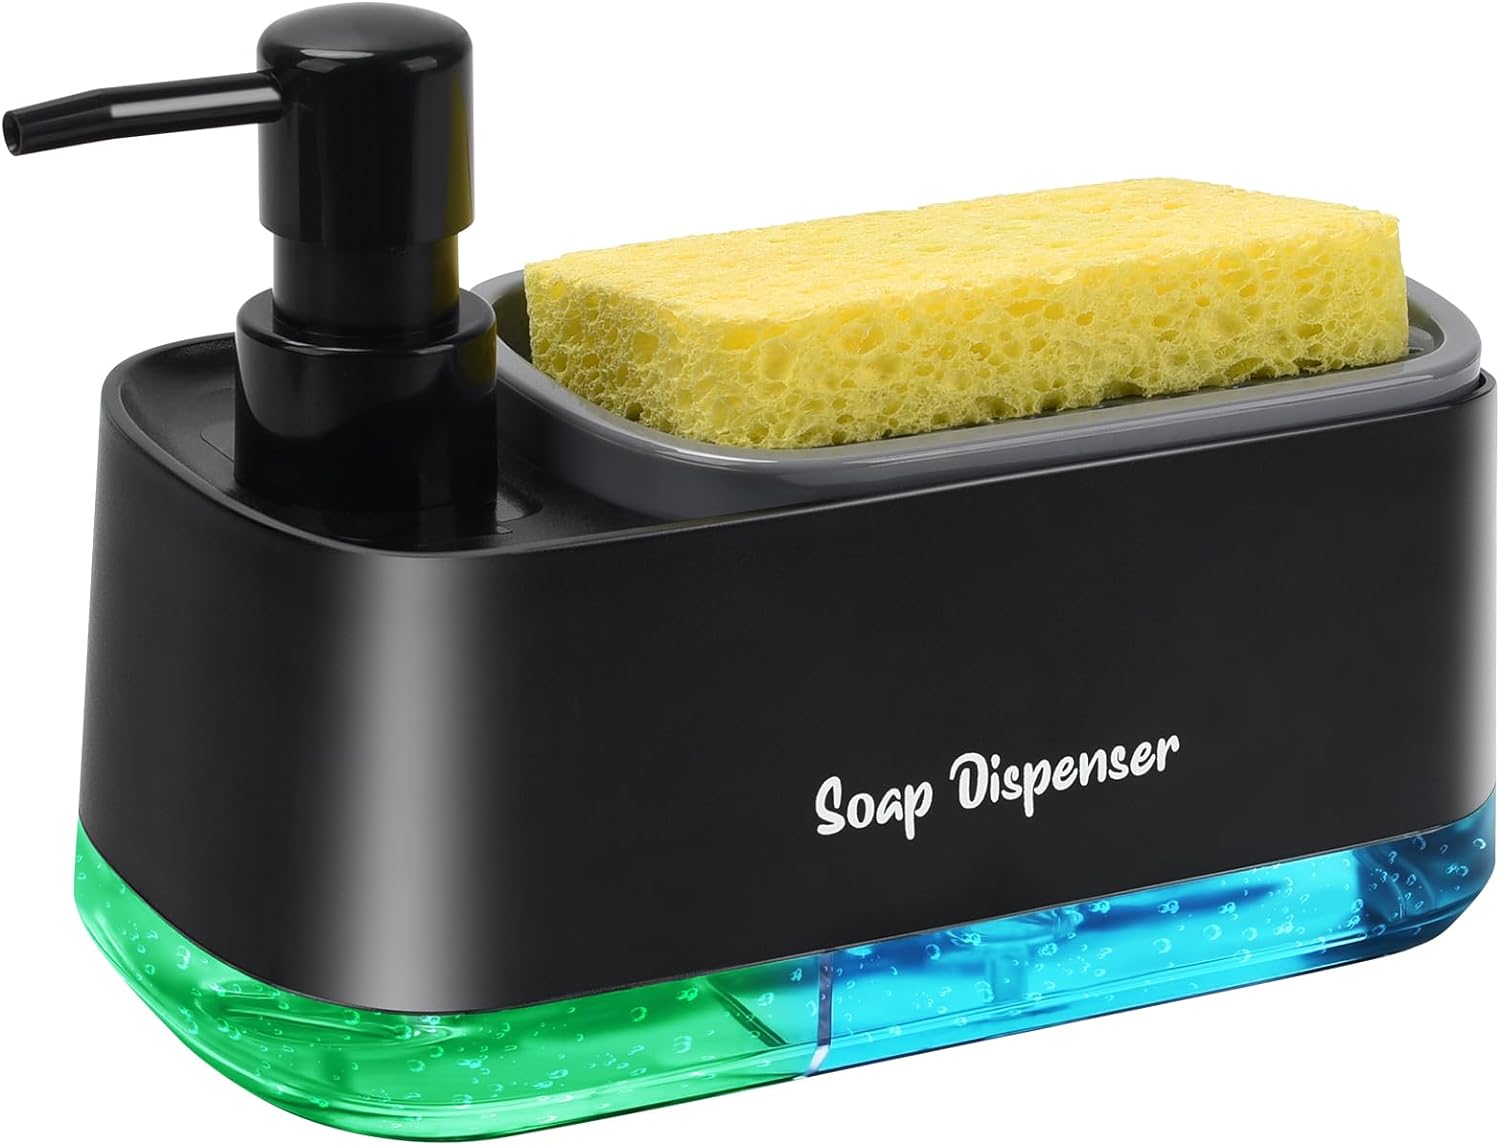 Kitchen Dish Soap Dispenser Set，Dish and Hand Soap Dispenser with Sponge Holder, 3-in-1 Countertop Sponge Dual Soap Pump Dispenser for Kitchen Sink - Black